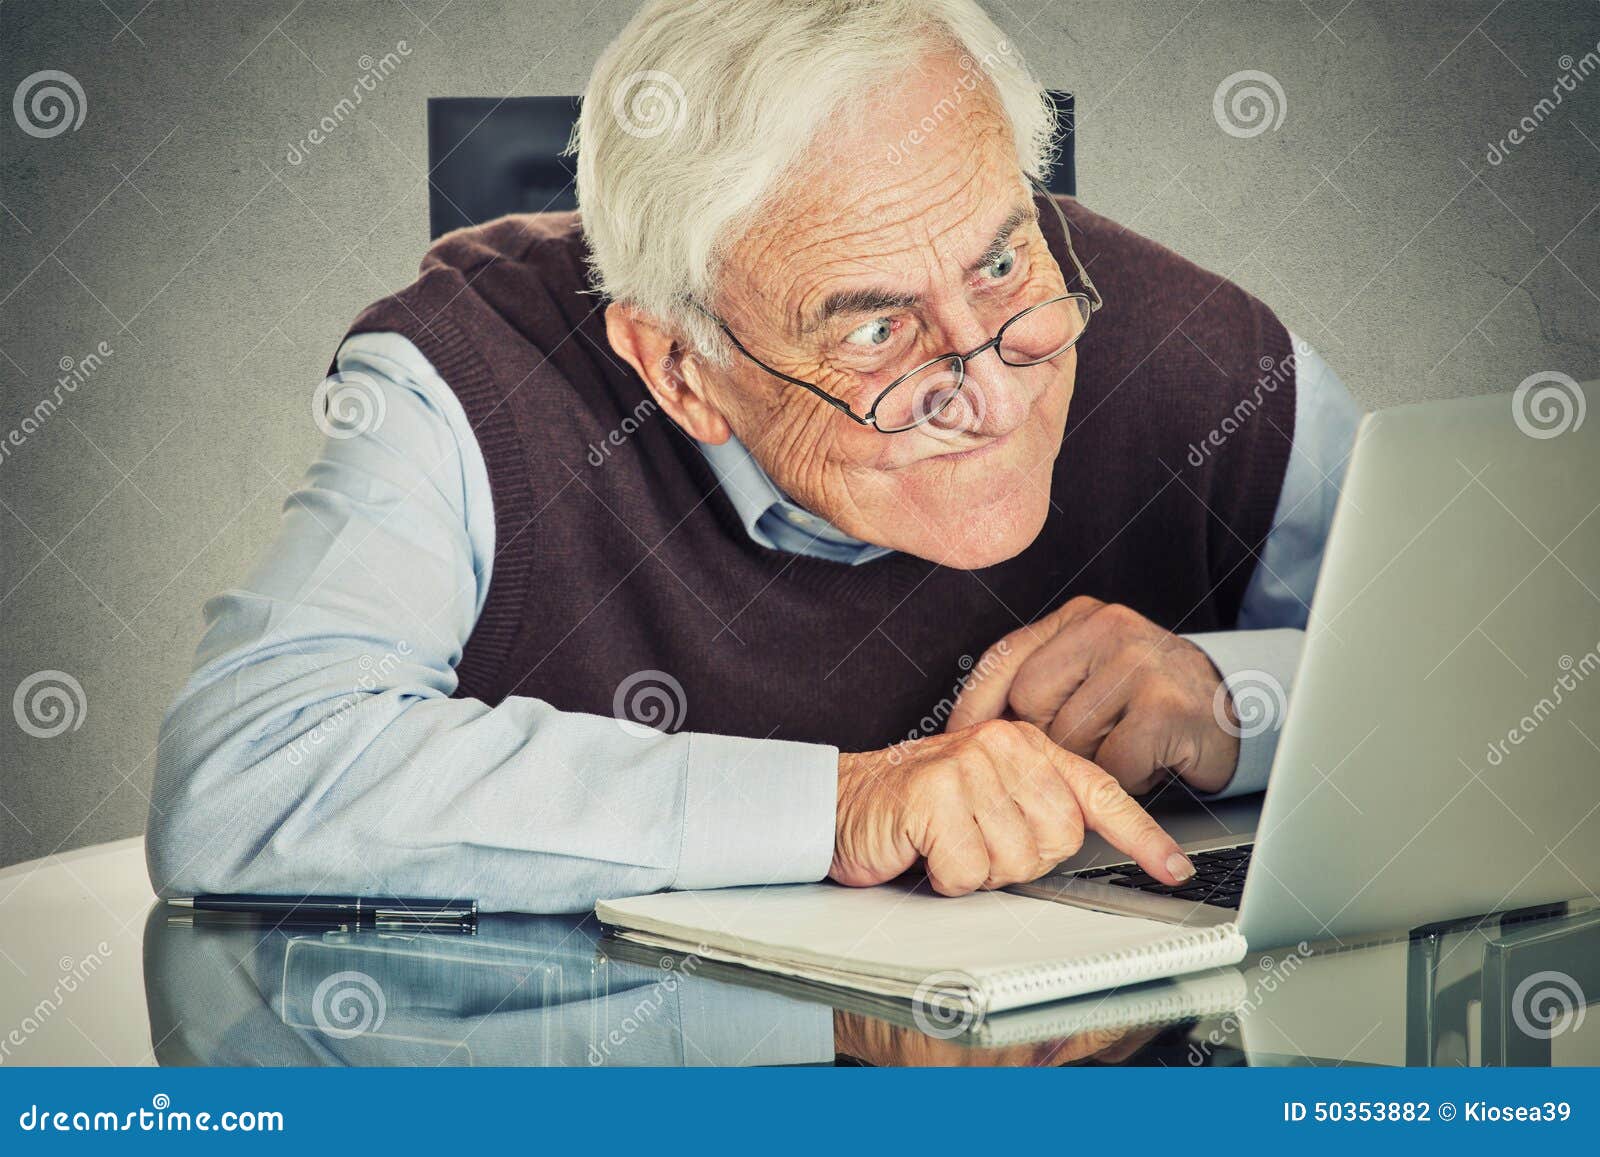 elderly old man using laptop computer sitting table isolated grey wall background senior people technology concept 50353882